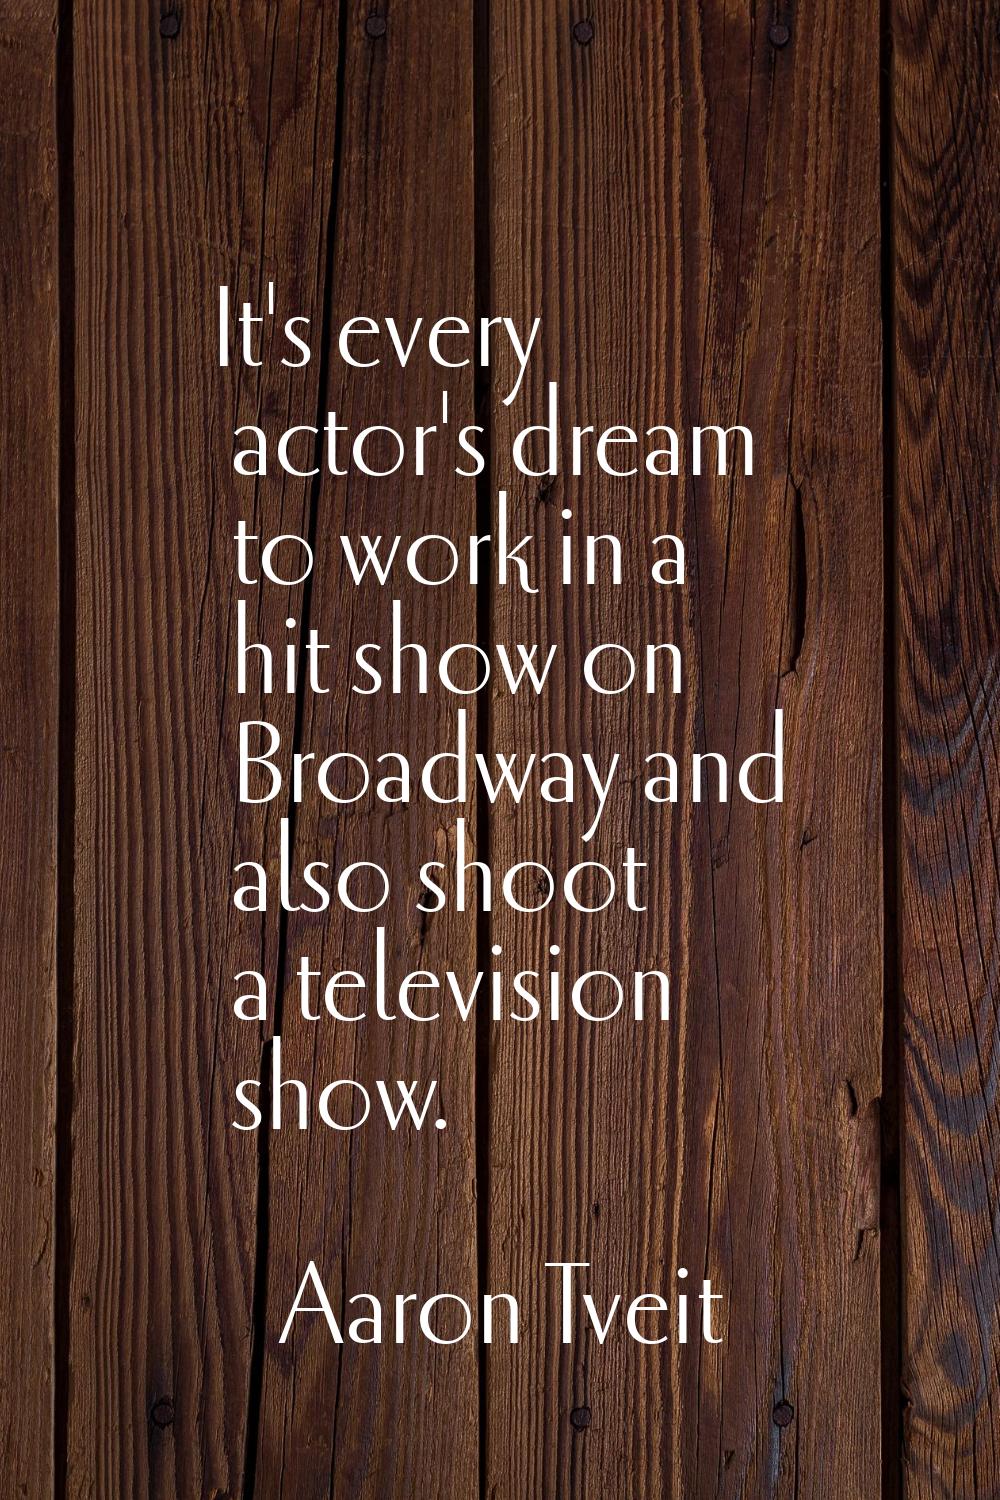 It's every actor's dream to work in a hit show on Broadway and also shoot a television show.